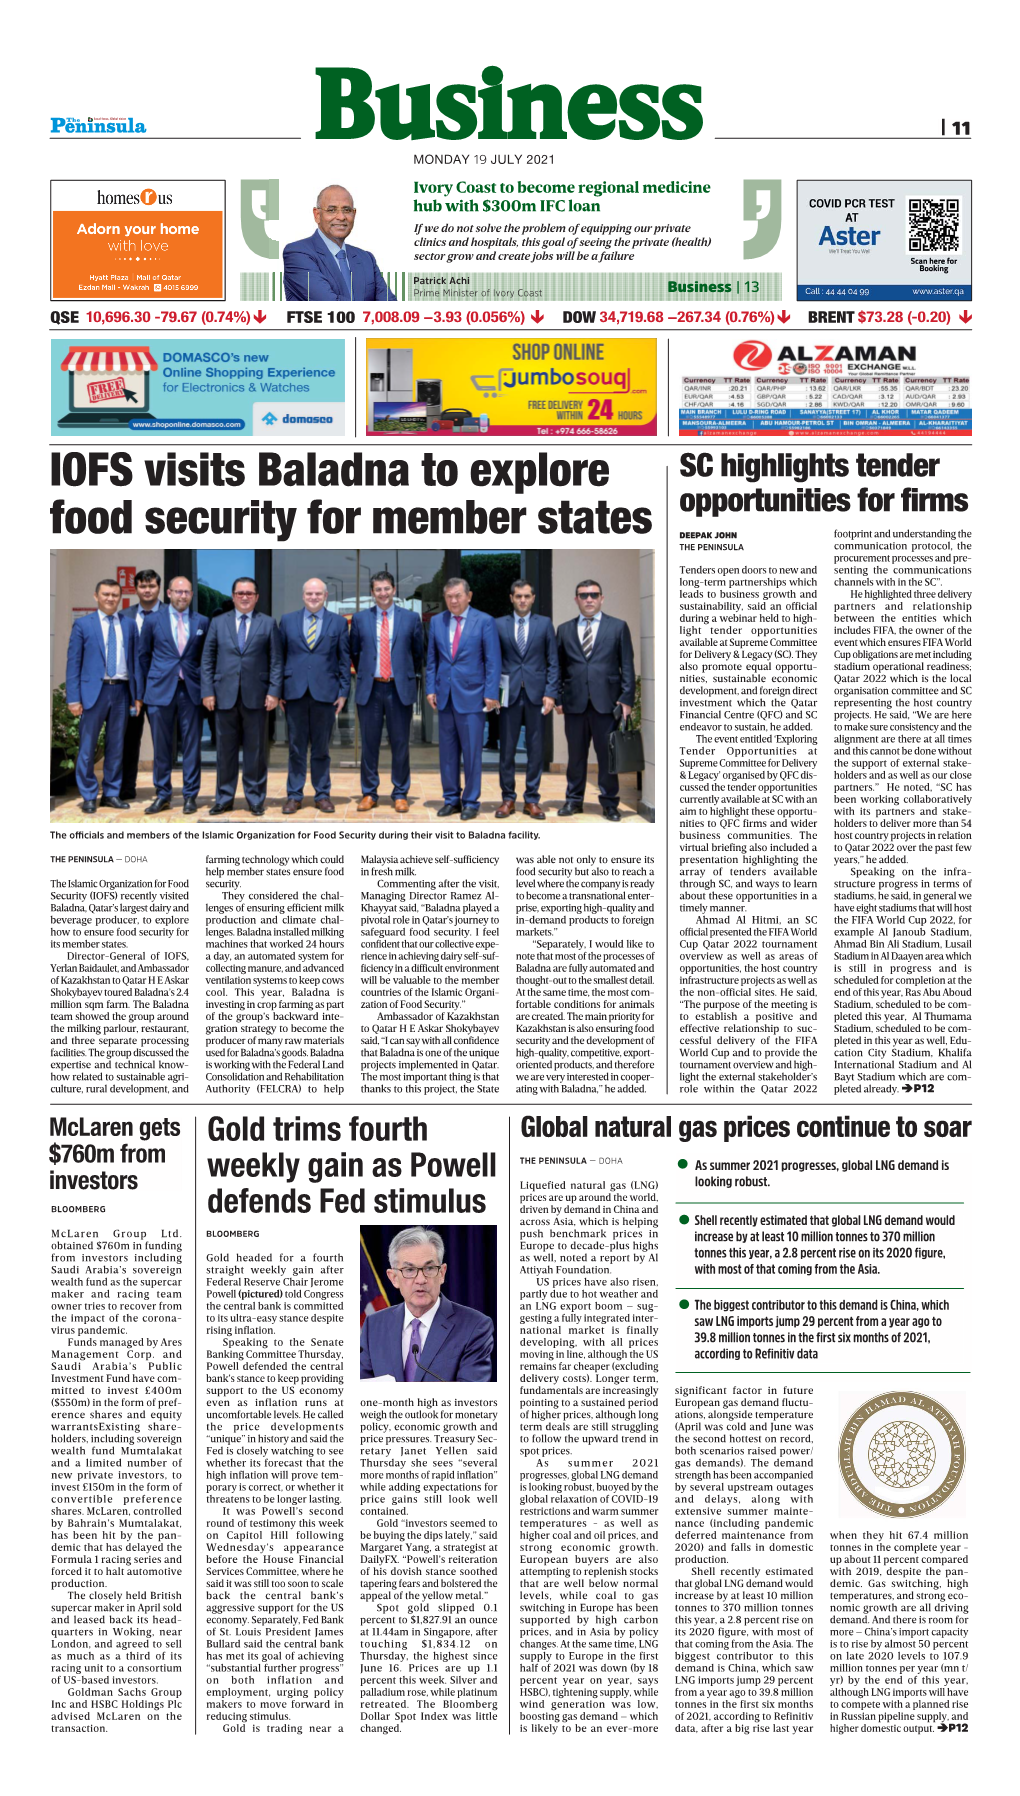 IOFS Visits Baladna to Explore Food Security for Member States